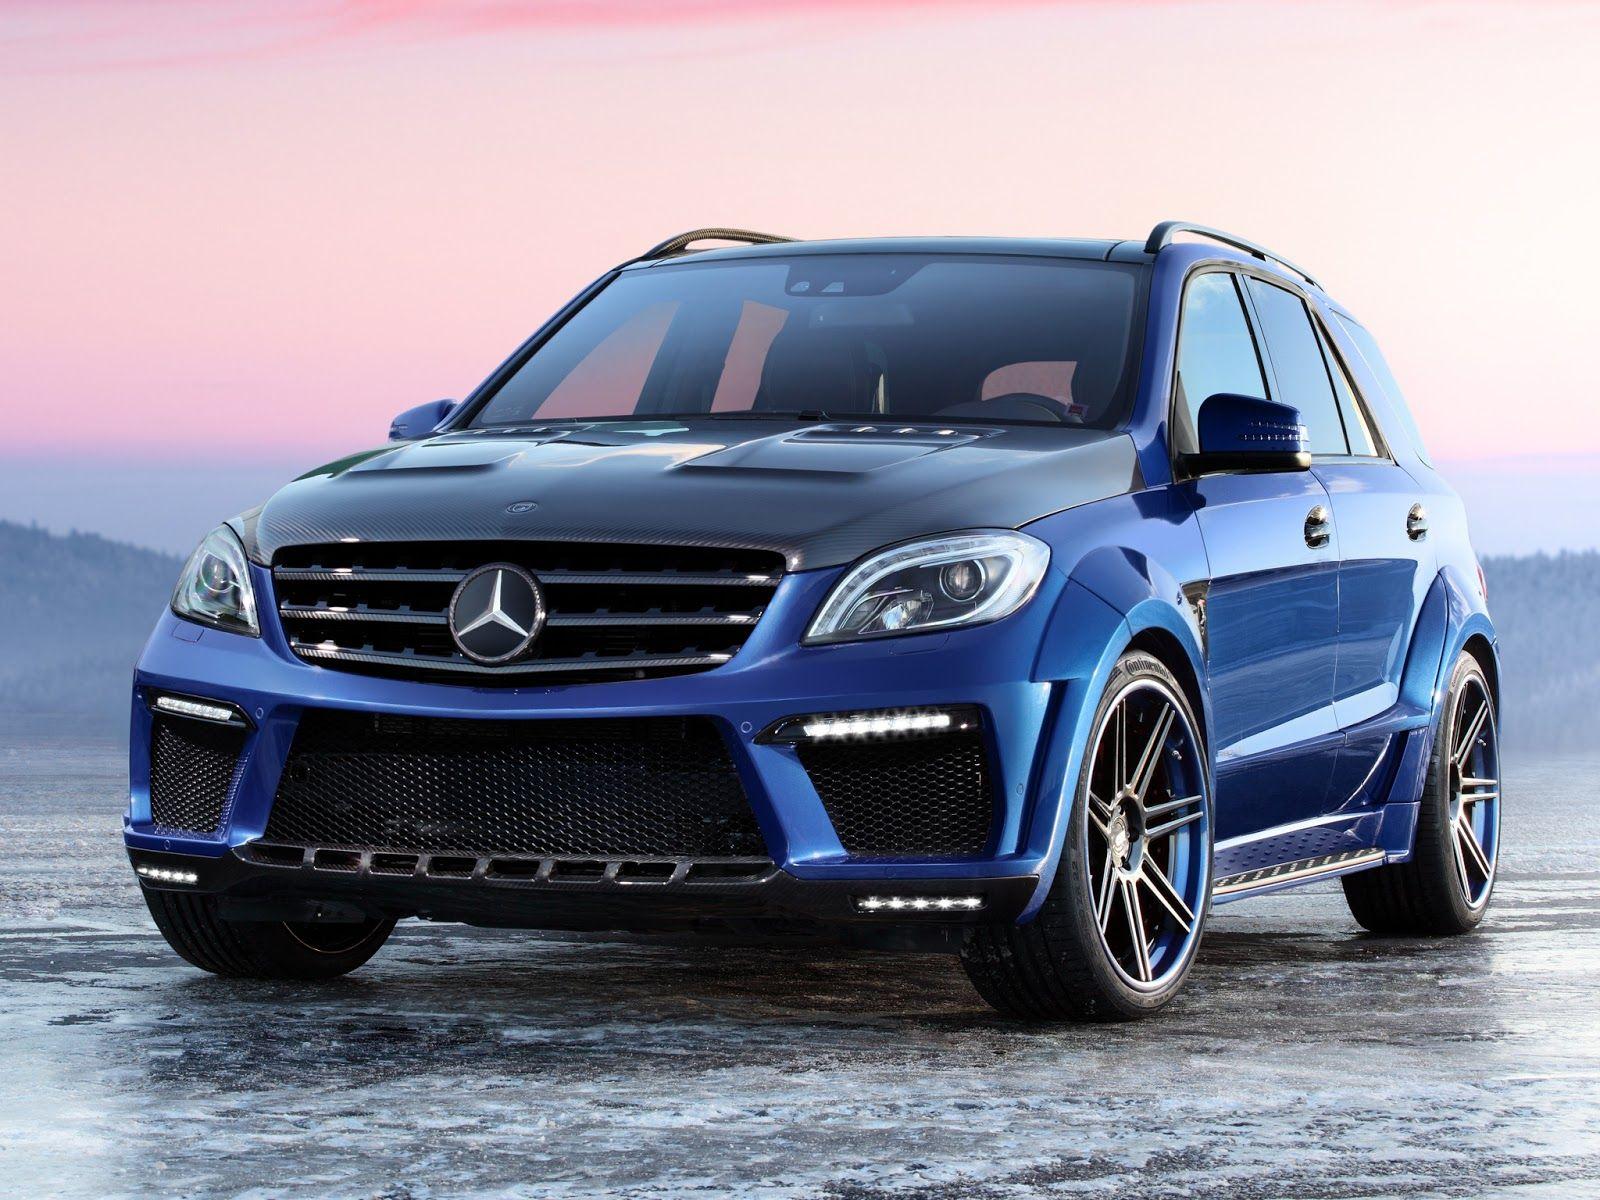 Mercedes Benz SUV Wallpaper In Blue Latest Cars Models Collection